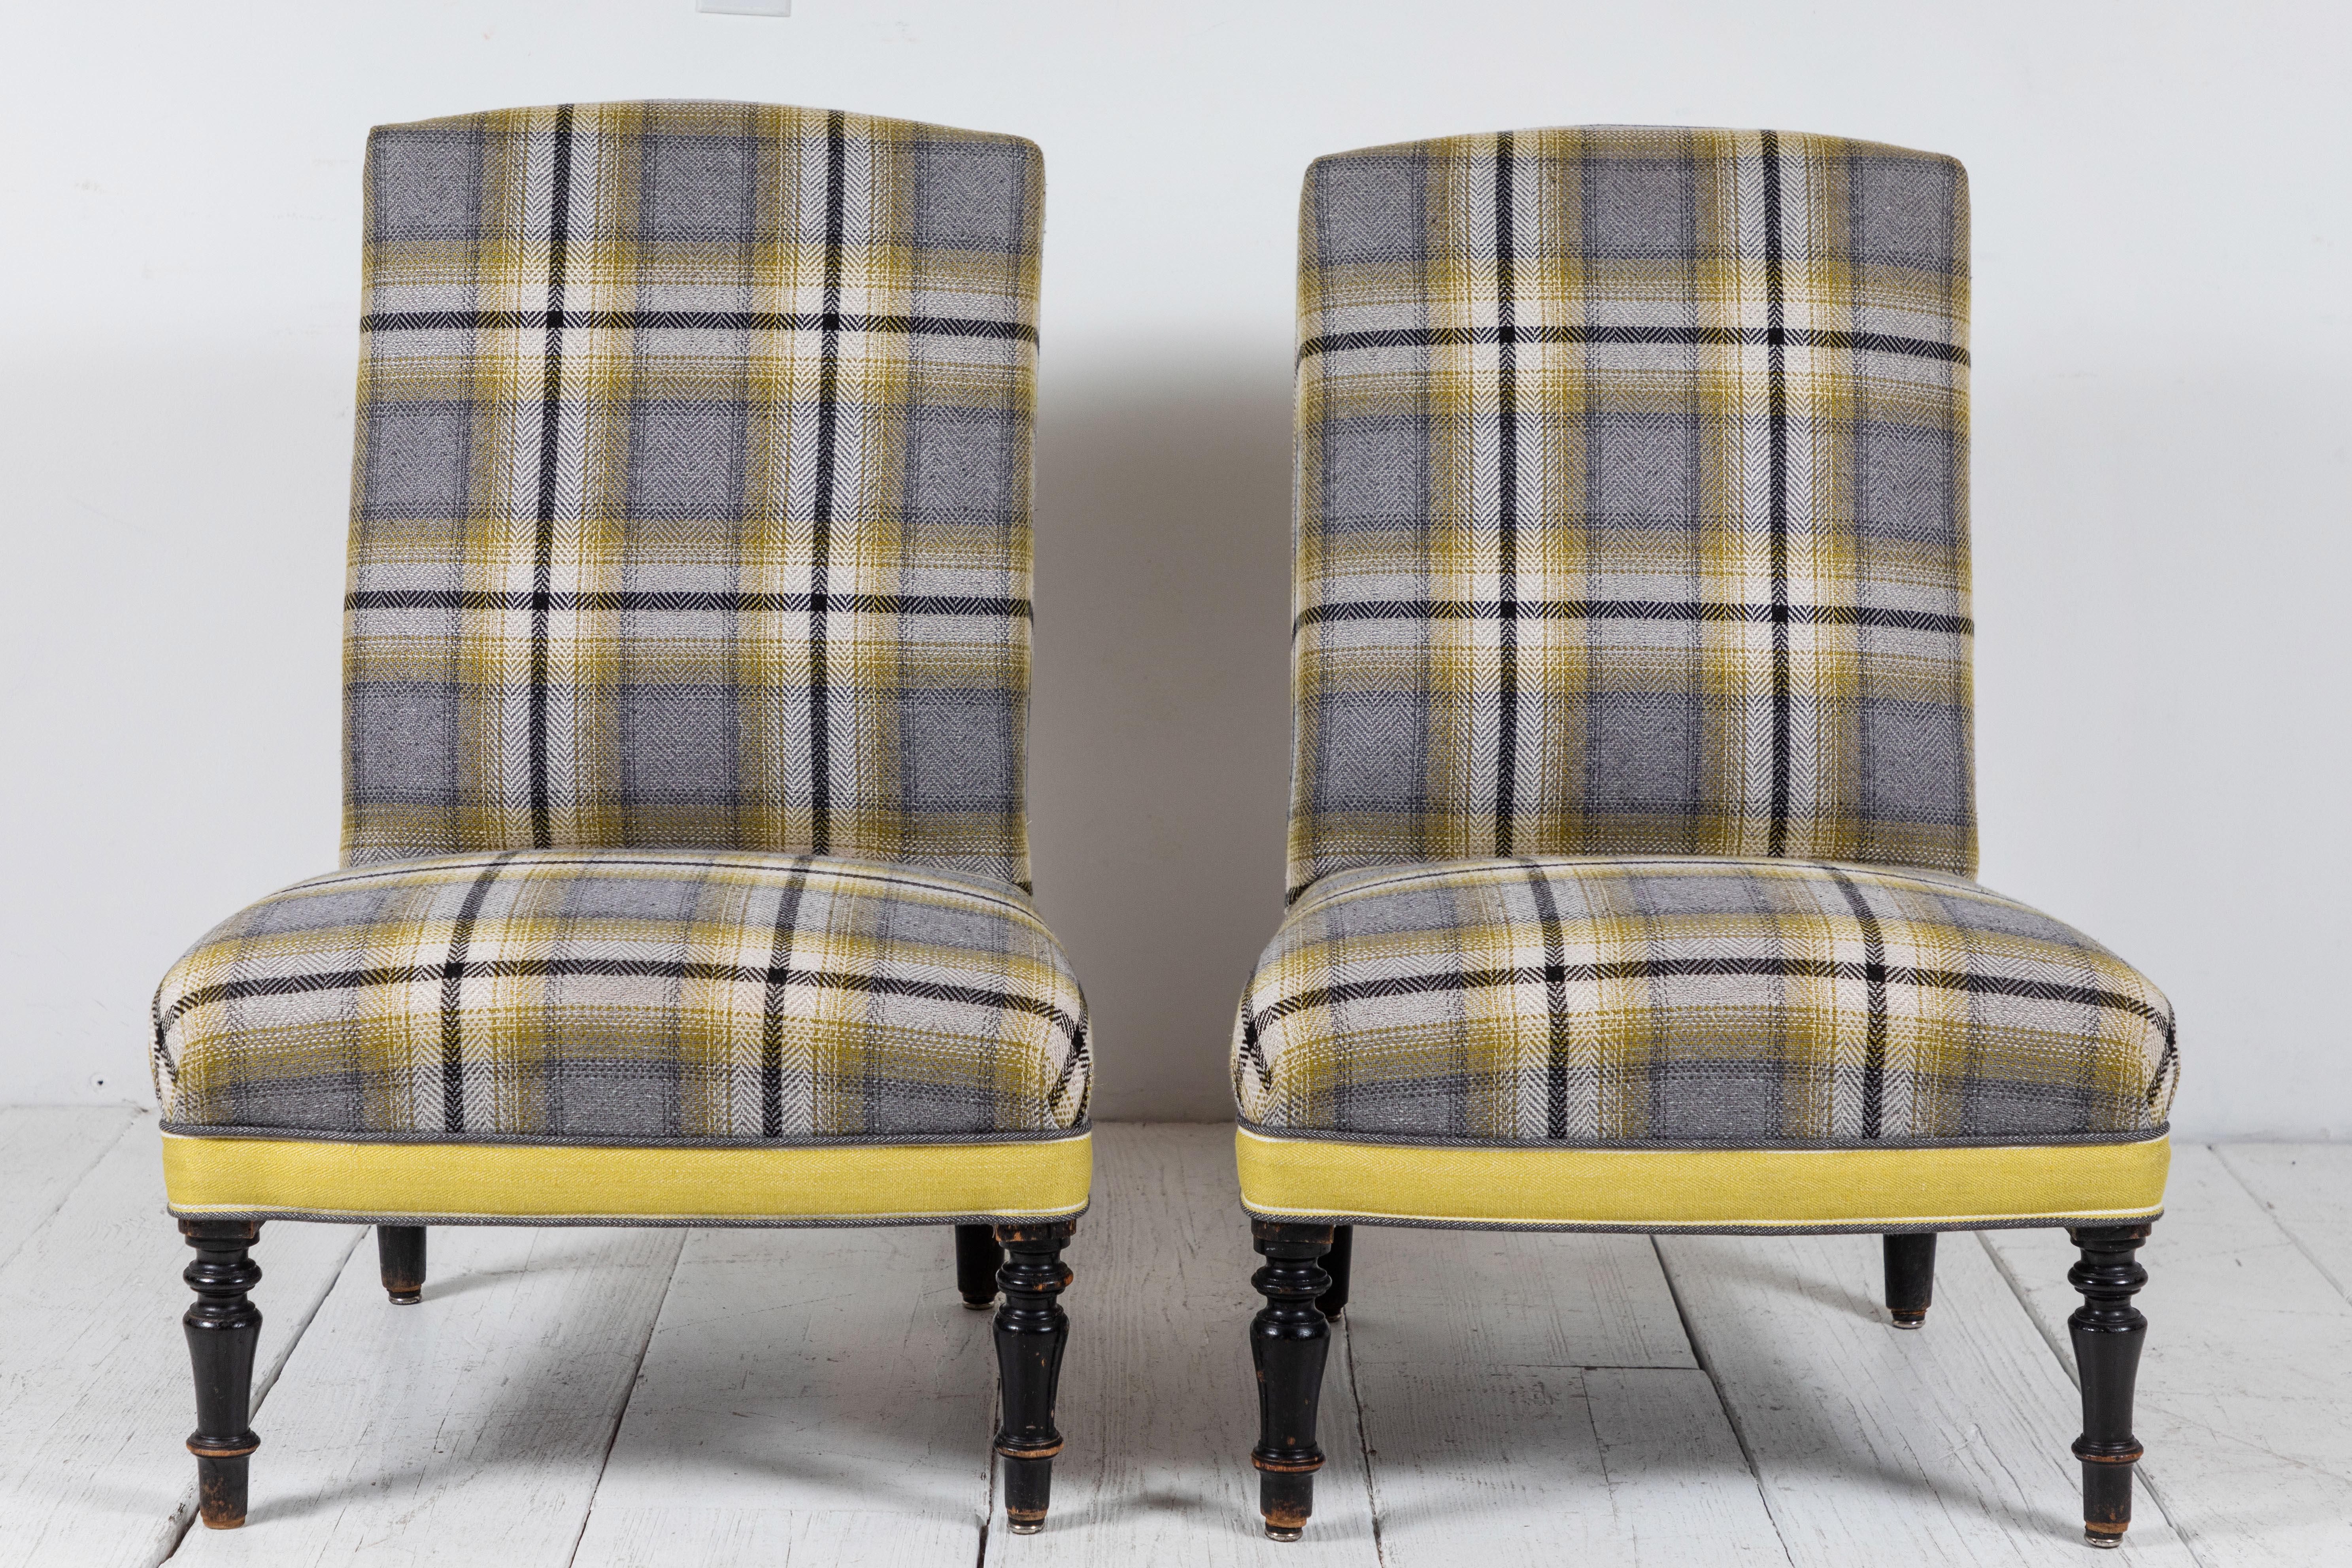 Pair of French slipper chairs in yellow and grey plaid. The chairs sit on original turned legs.